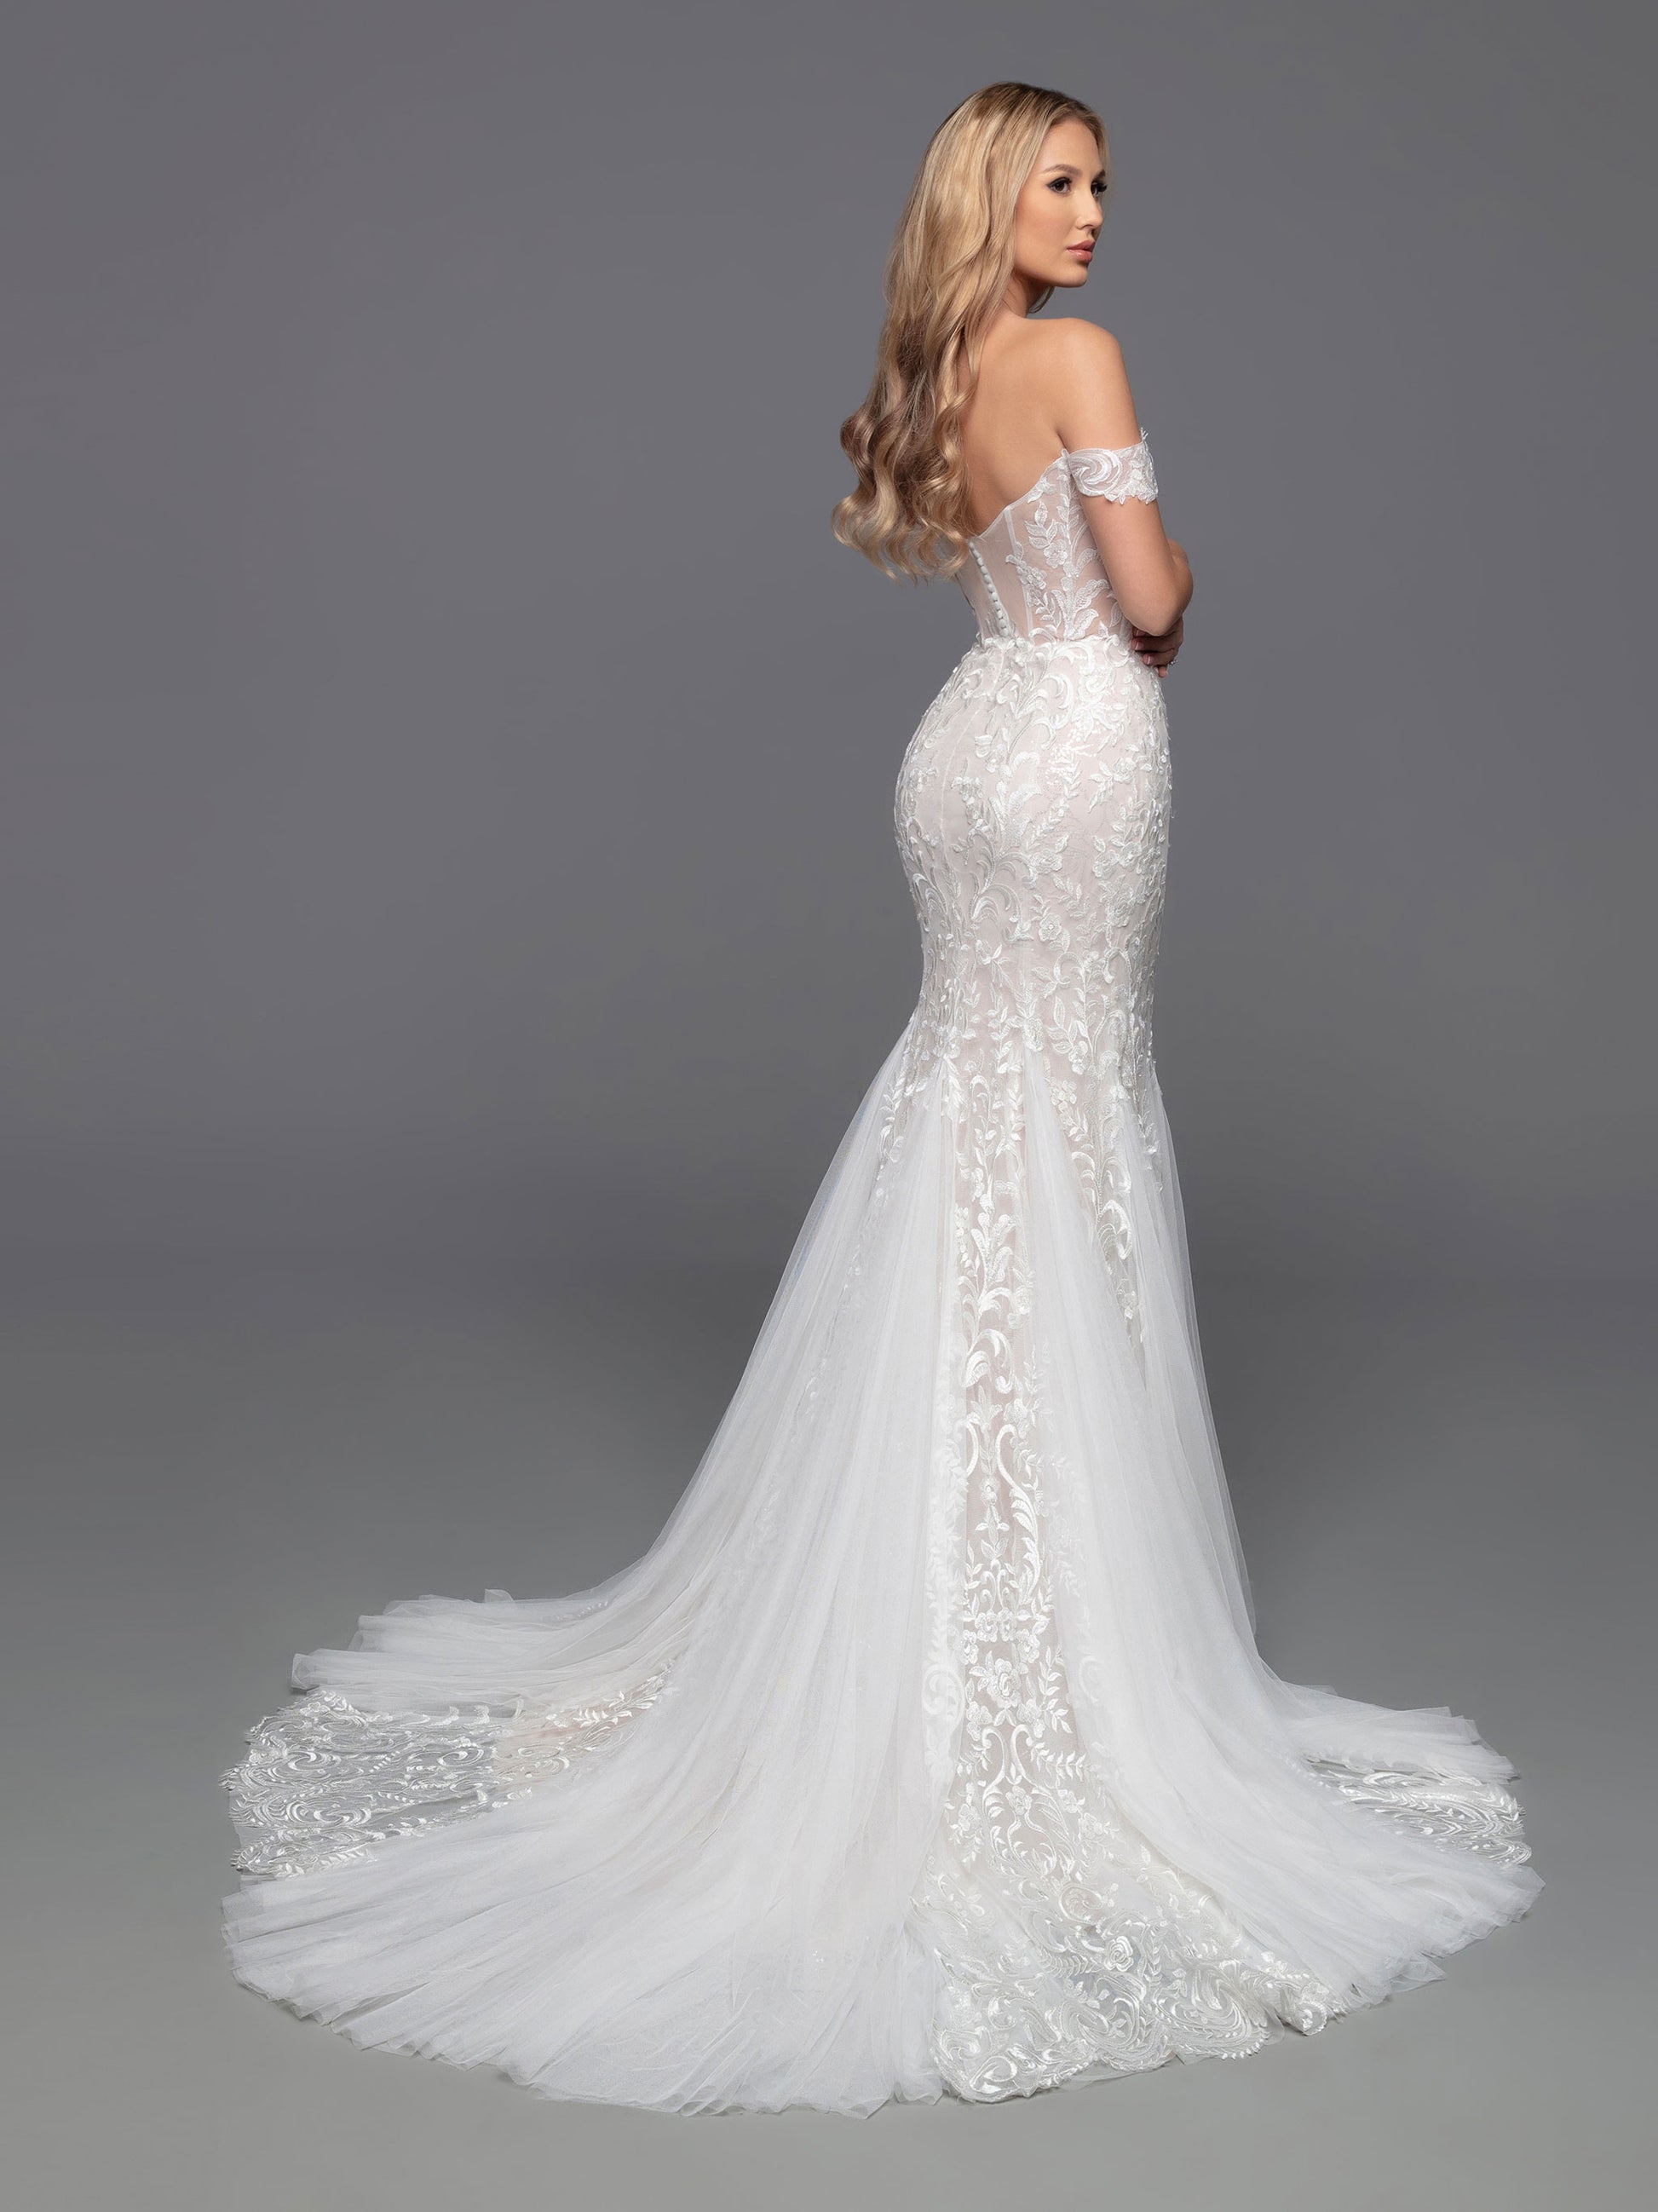 Look elegant and timeless in the Davinci Bridal 50812 Shimmer Lace Mermaid Wedding Dress. This luxurious gown features a lace bodice lined with sheer, off-the-shoulder sleeves, a sheer back, and covered buttons. Soft tulle, vertical lace panels and sheer lace panels enhance the design of this beautiful fit & flare gown, and a chapel train completes the look.  Sizes: 2-20  Colors: Ivory/Ivory, Ivory/Nude